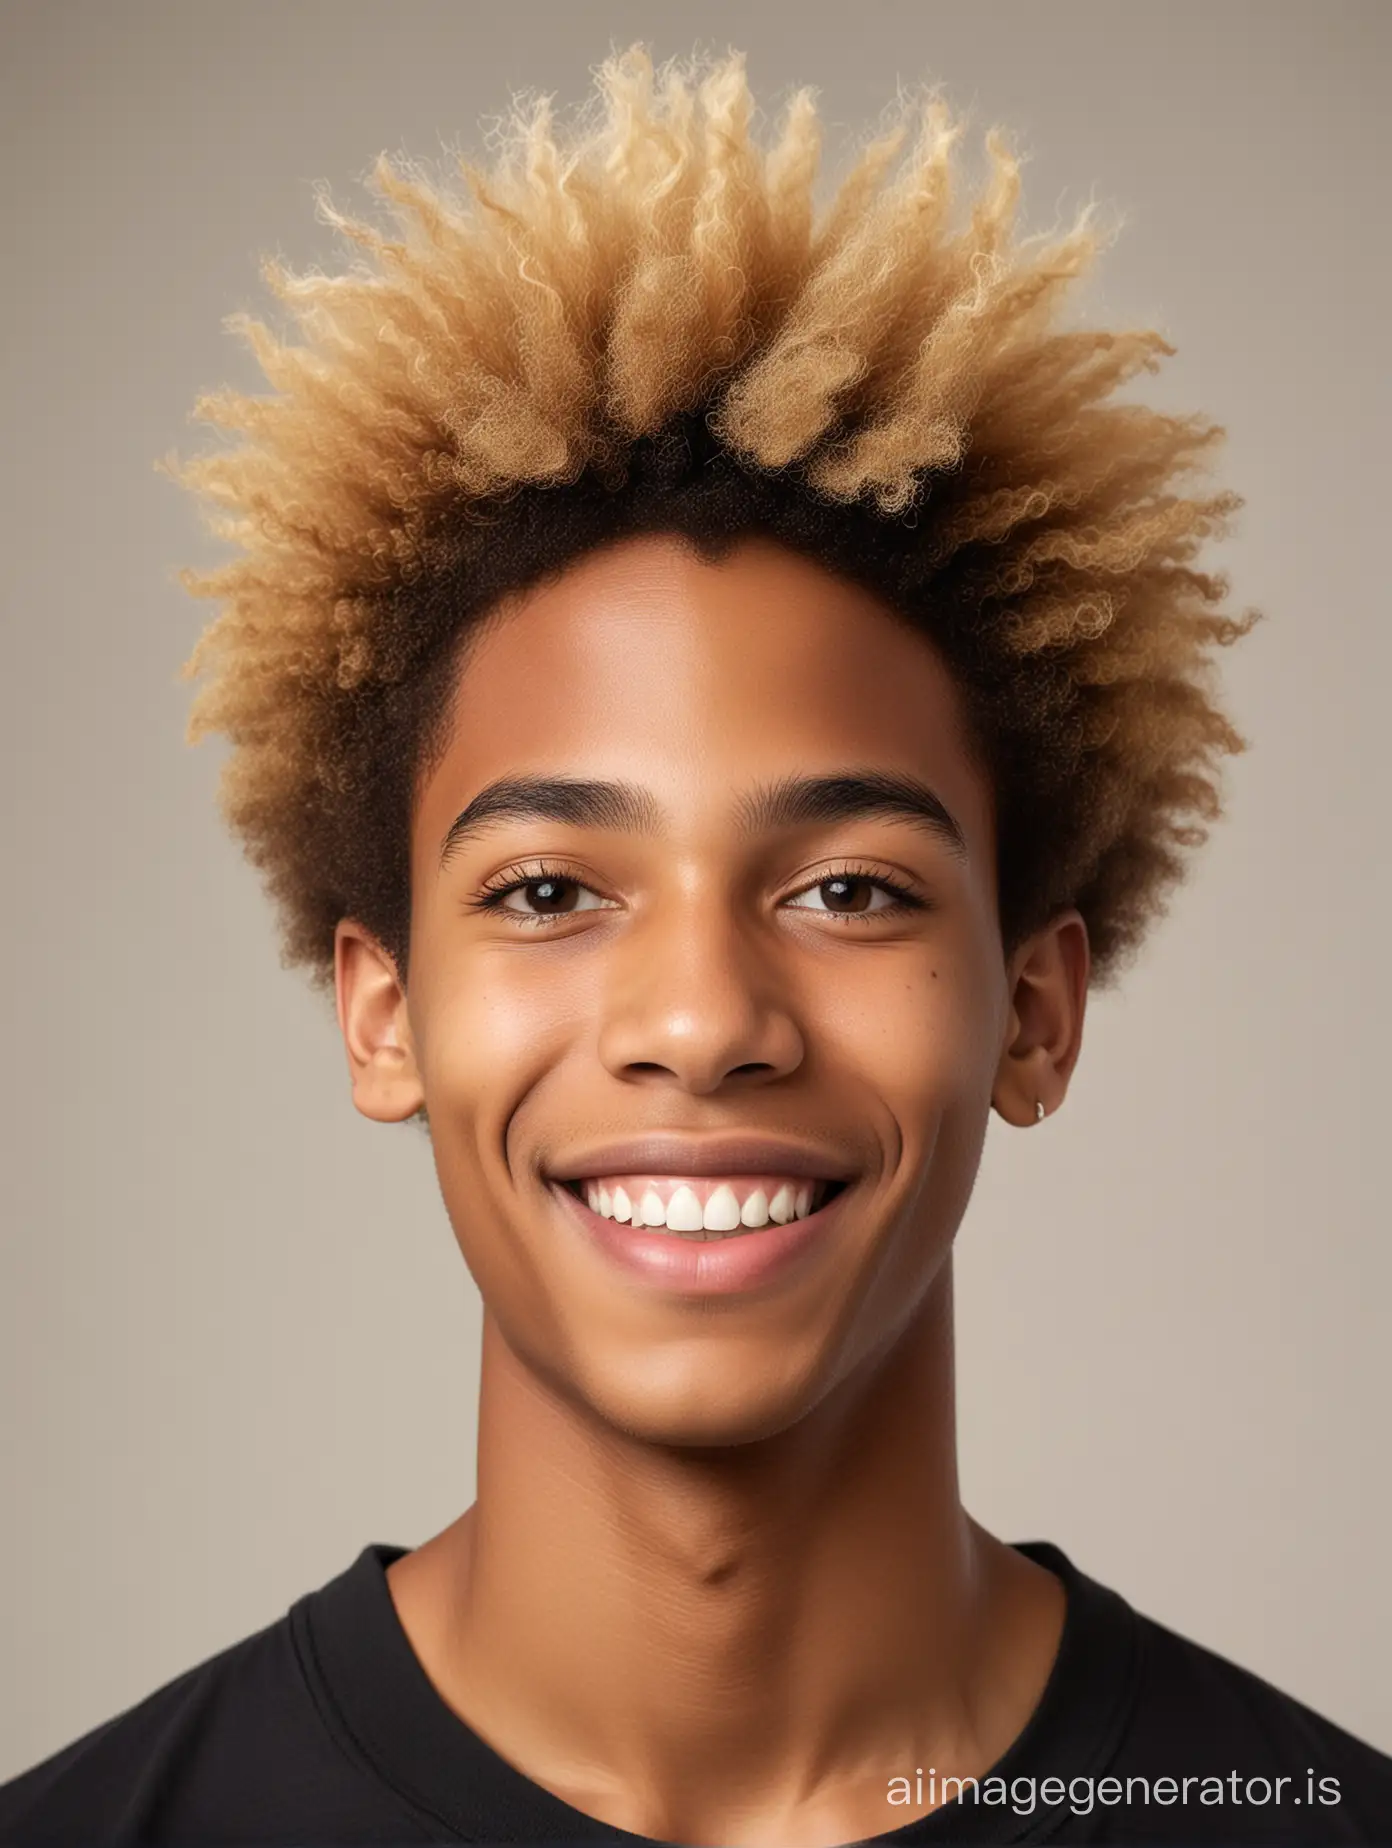 portrait photo of dark-skinned black teenage boy with blonde afro hair, large pointy ears, large flat nose and sharp jawline, smiling, plain light background